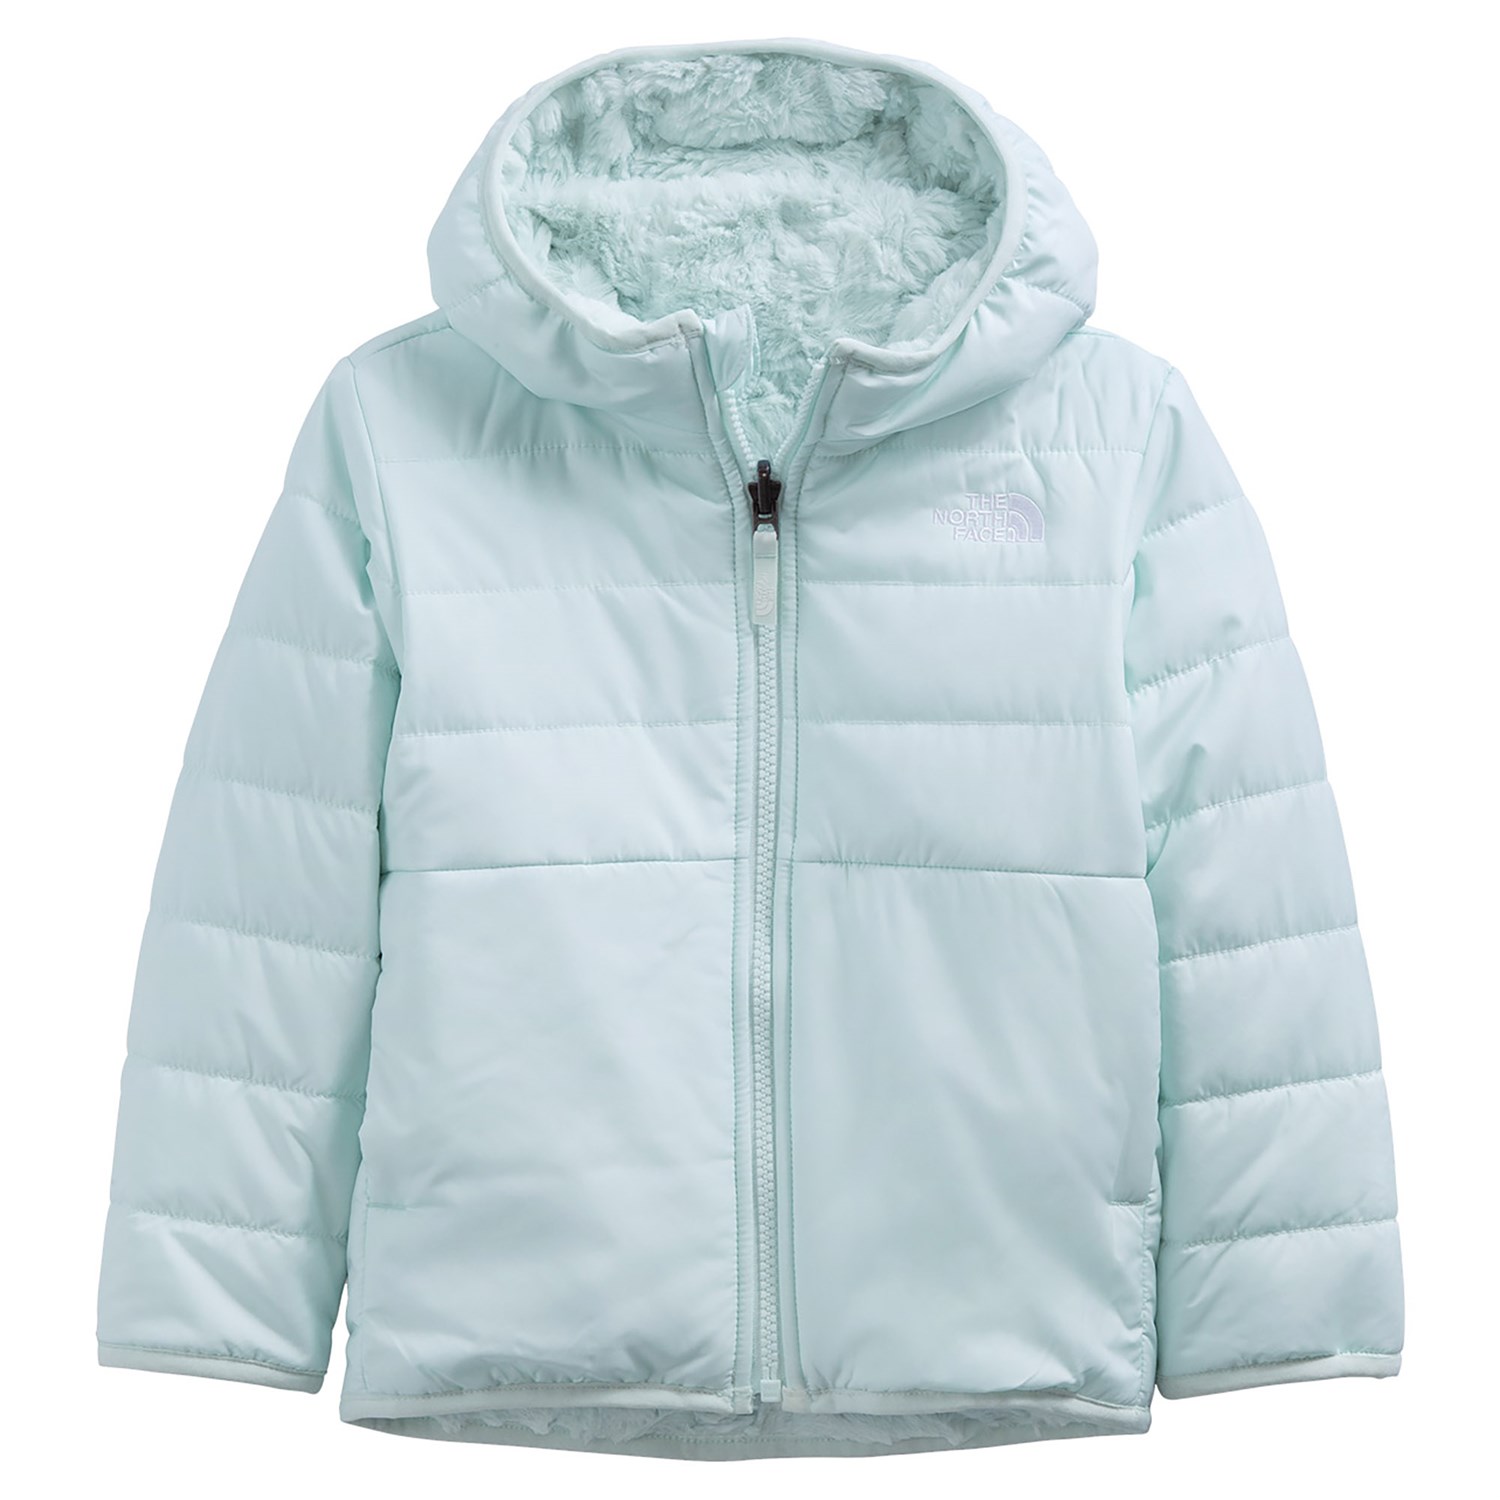 The North Face Reversible Mossbud Swirl Full Zip Hooded Jacket - Toddlers'